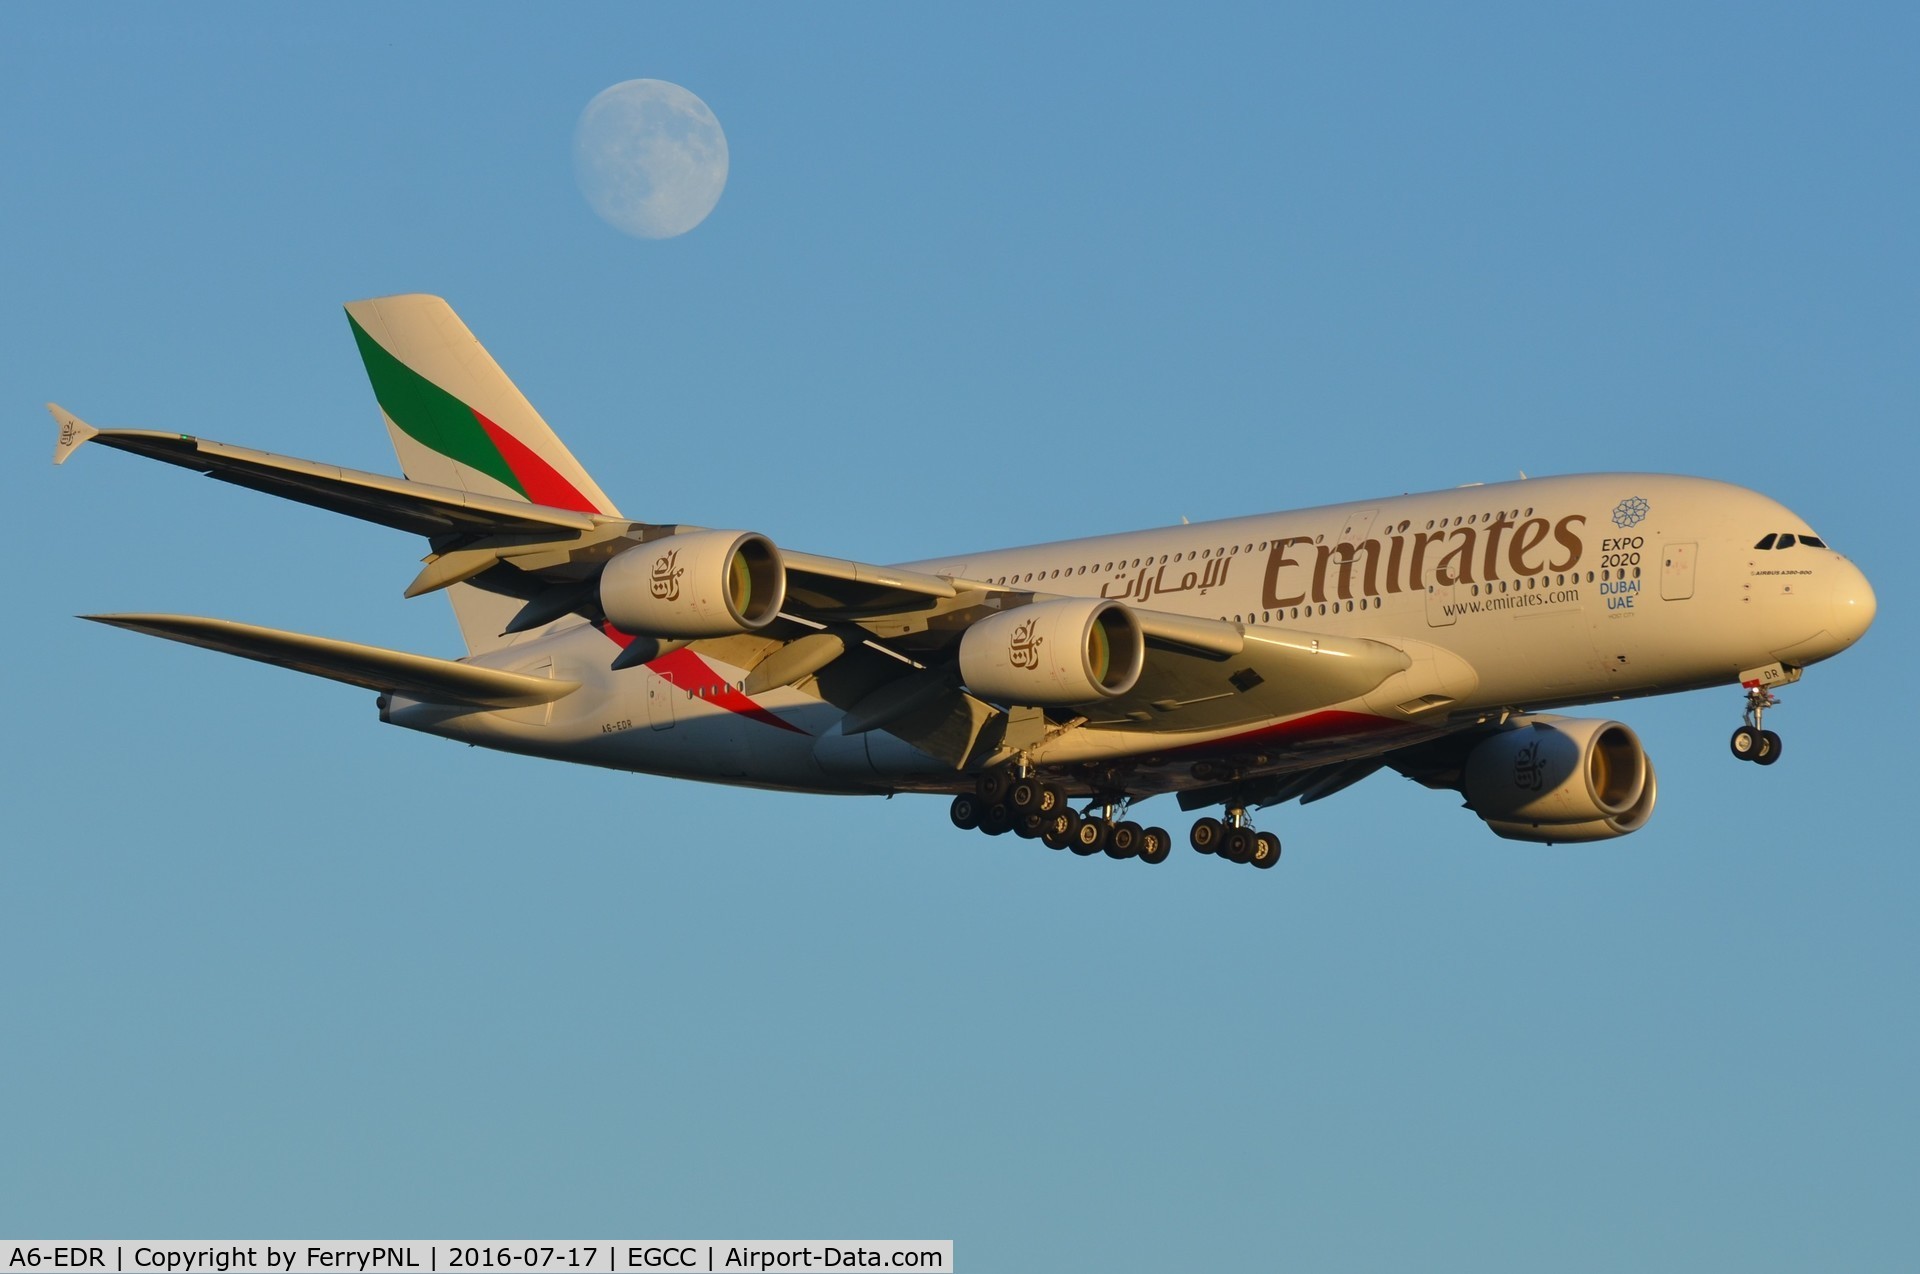 A6-EDR, 2011 Airbus A380-861 C/N 083, Emirates passes by the moon on its way to LHR.